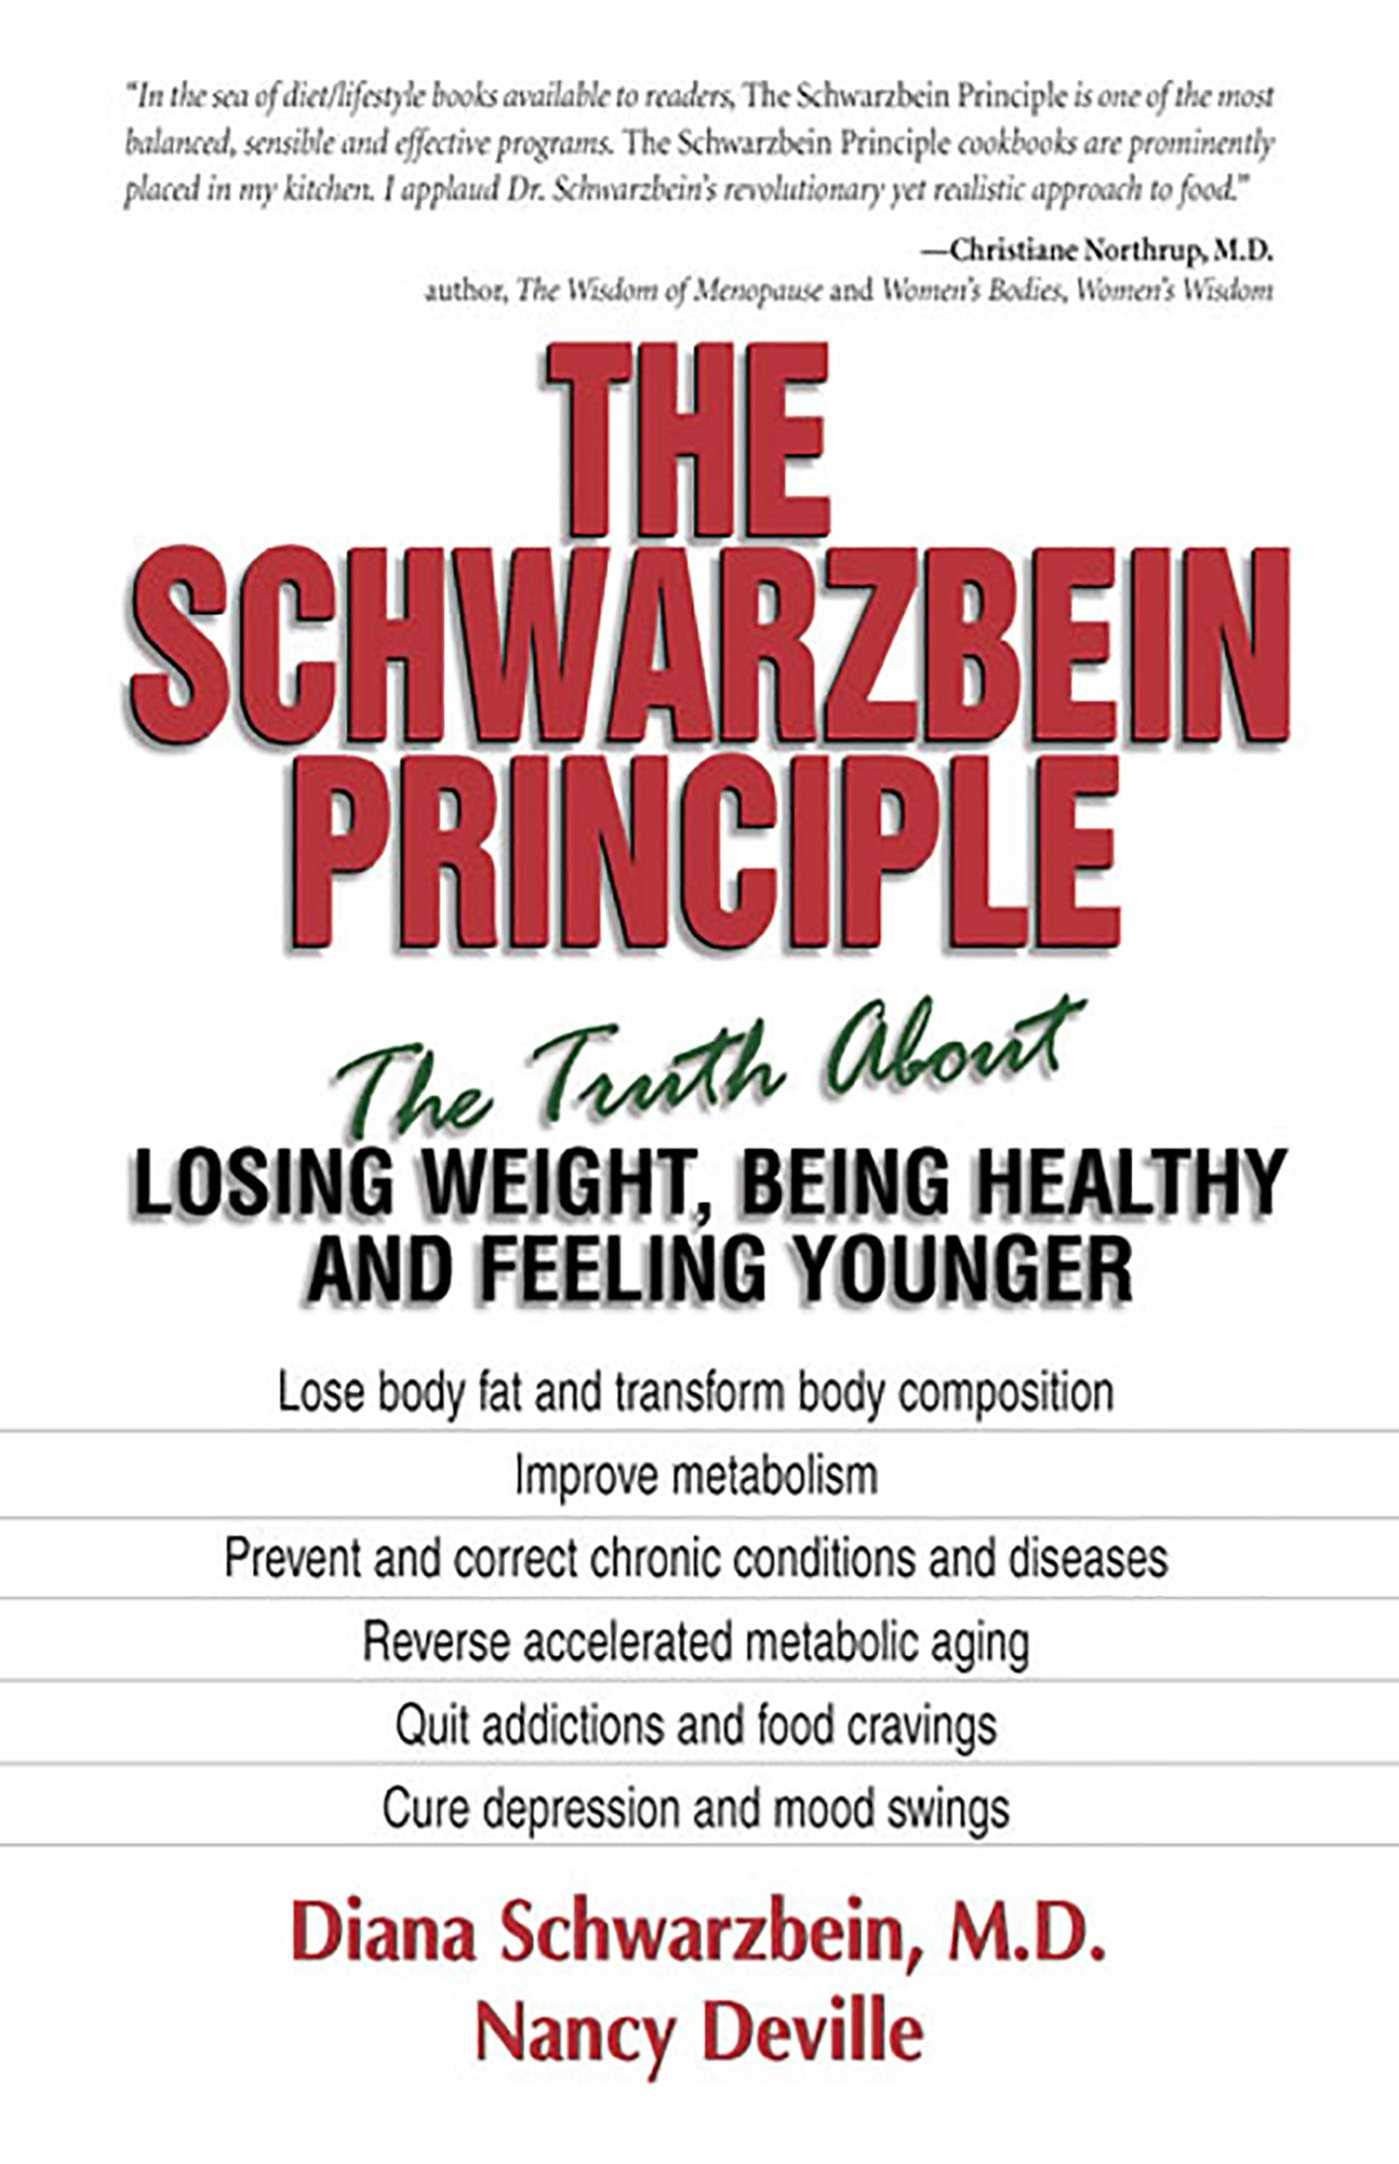 The Schwarzbein Principle: The Truth About Losing Weight, Being Healthy and Feeling Younger